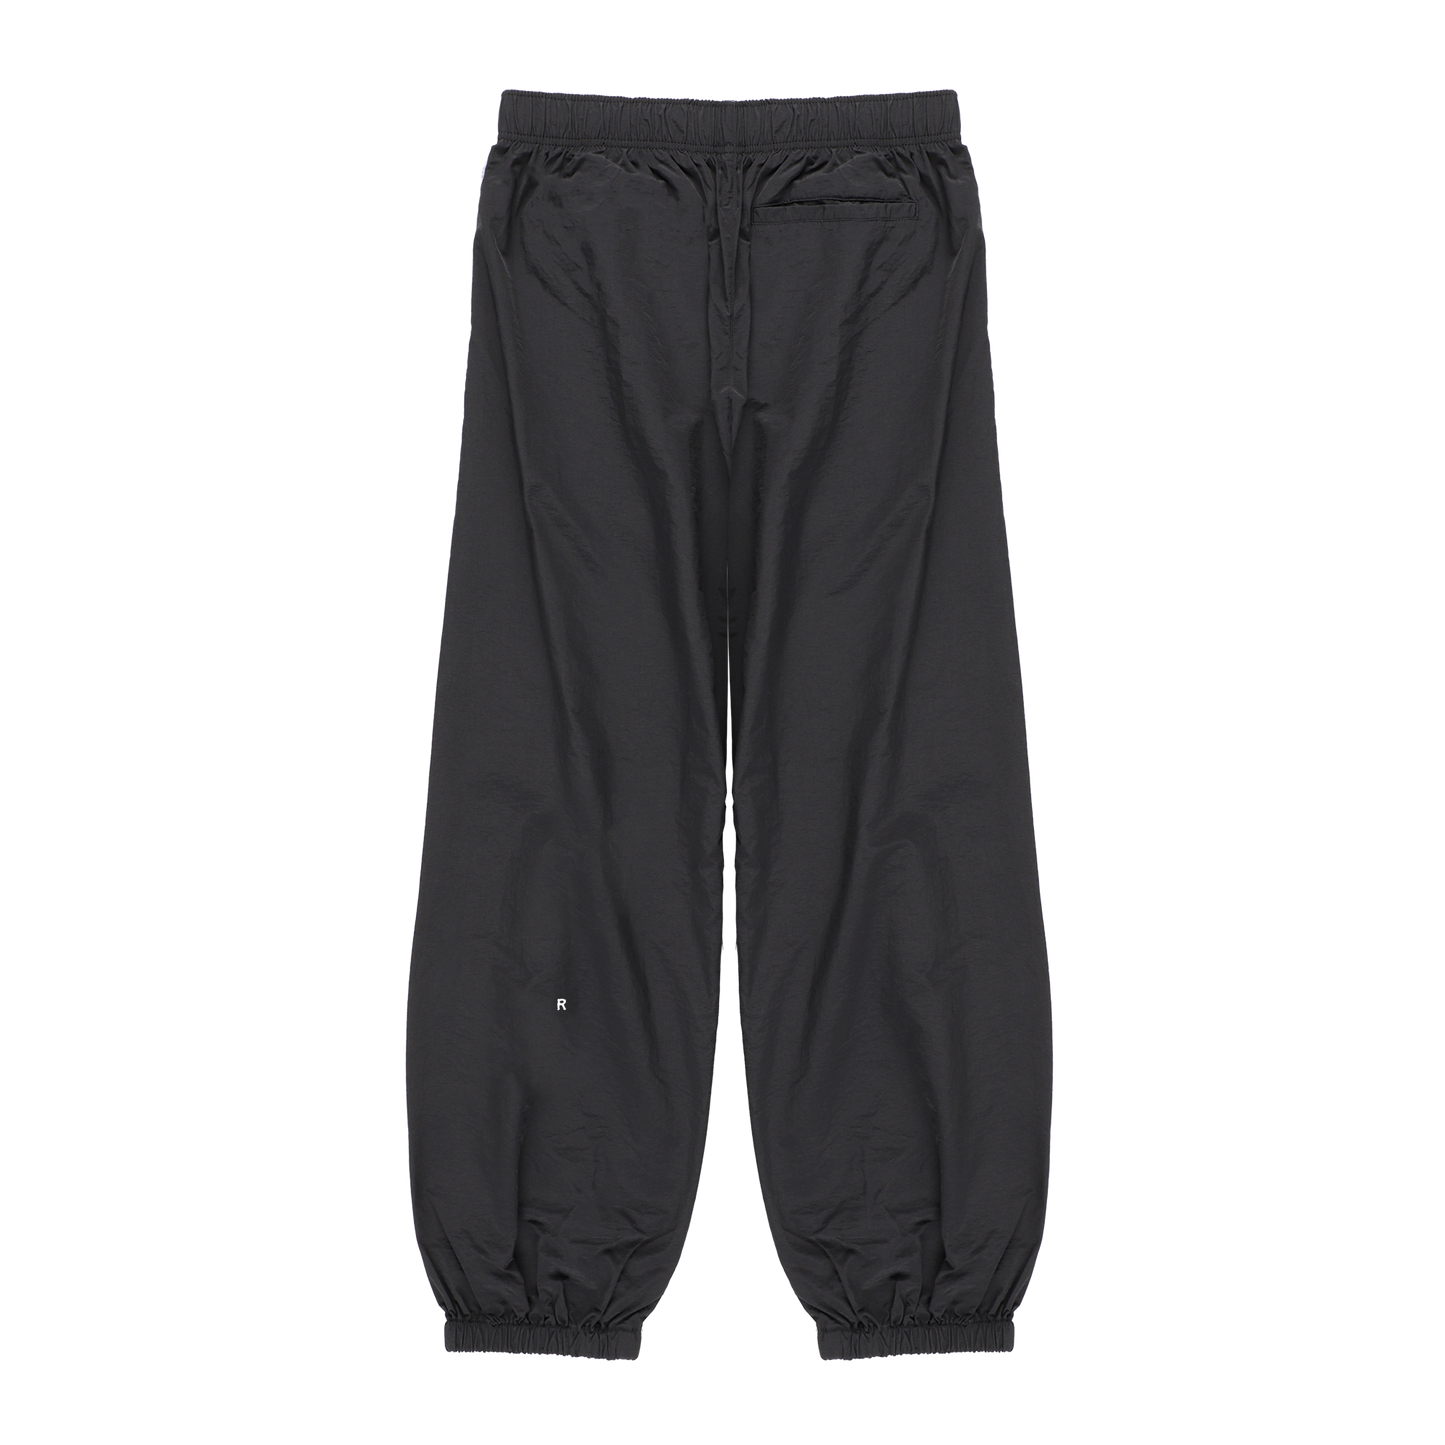 TRACK PANTS BLACK ( STUDY 7.02 : MULTIPLE EMBROIDERY) W/ LOGOS